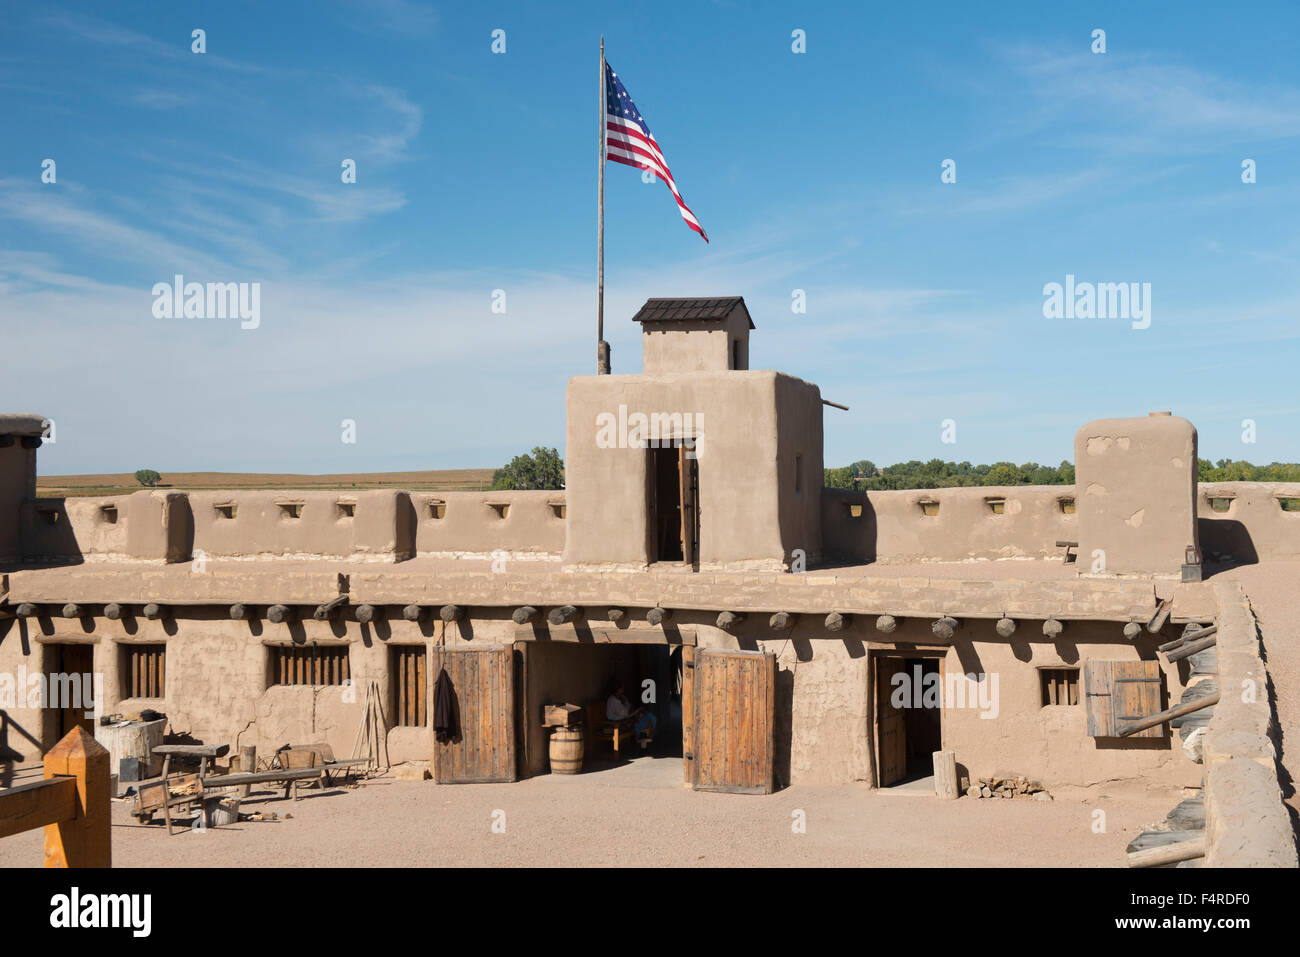 USA, UnitedStates, America, Southwest, Colorado, Otero County, Bent's Old Fort, National Historic Site, adobe, trading post, for Stock Photo